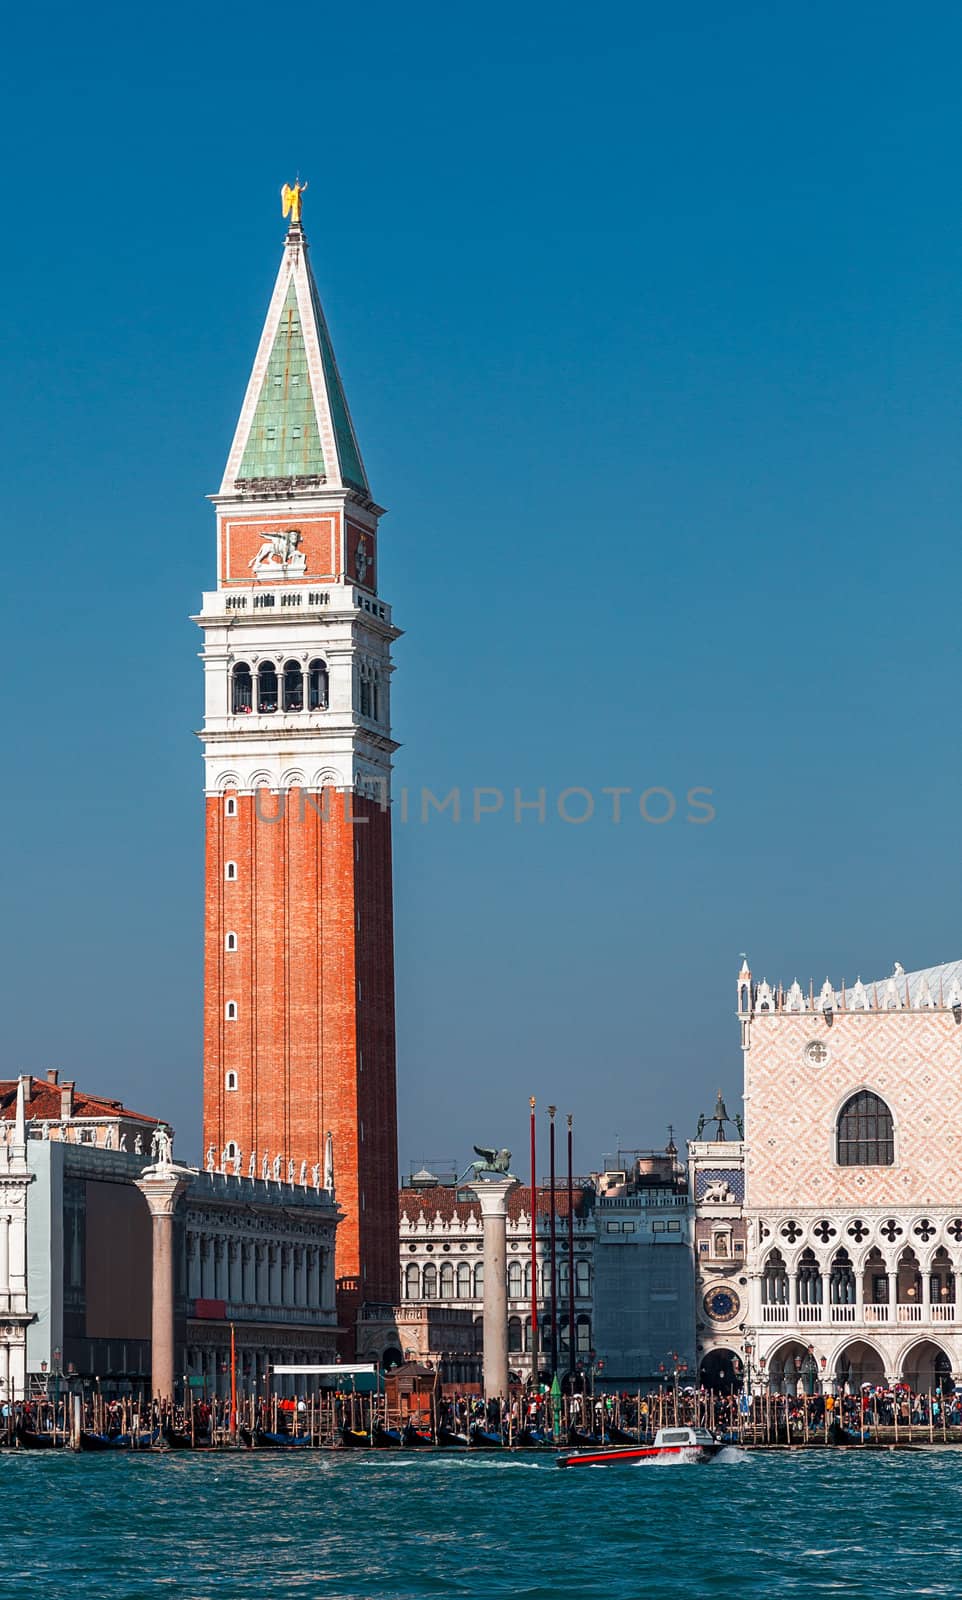 Vertical image of the one of the most famous construction in Venice: The St. Mark's Campanille